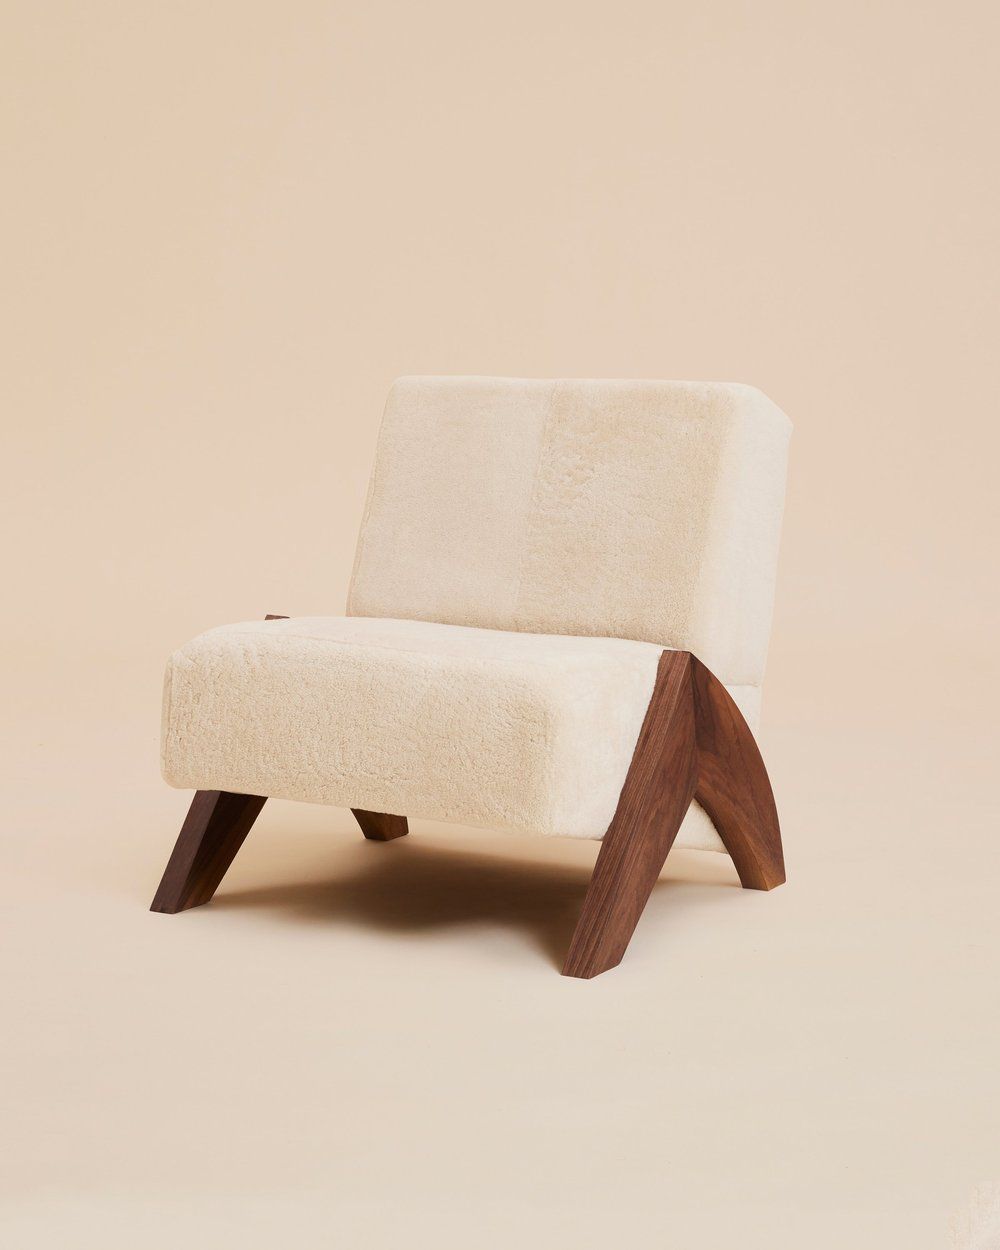 The Enzo Shearling Chair by Arjé